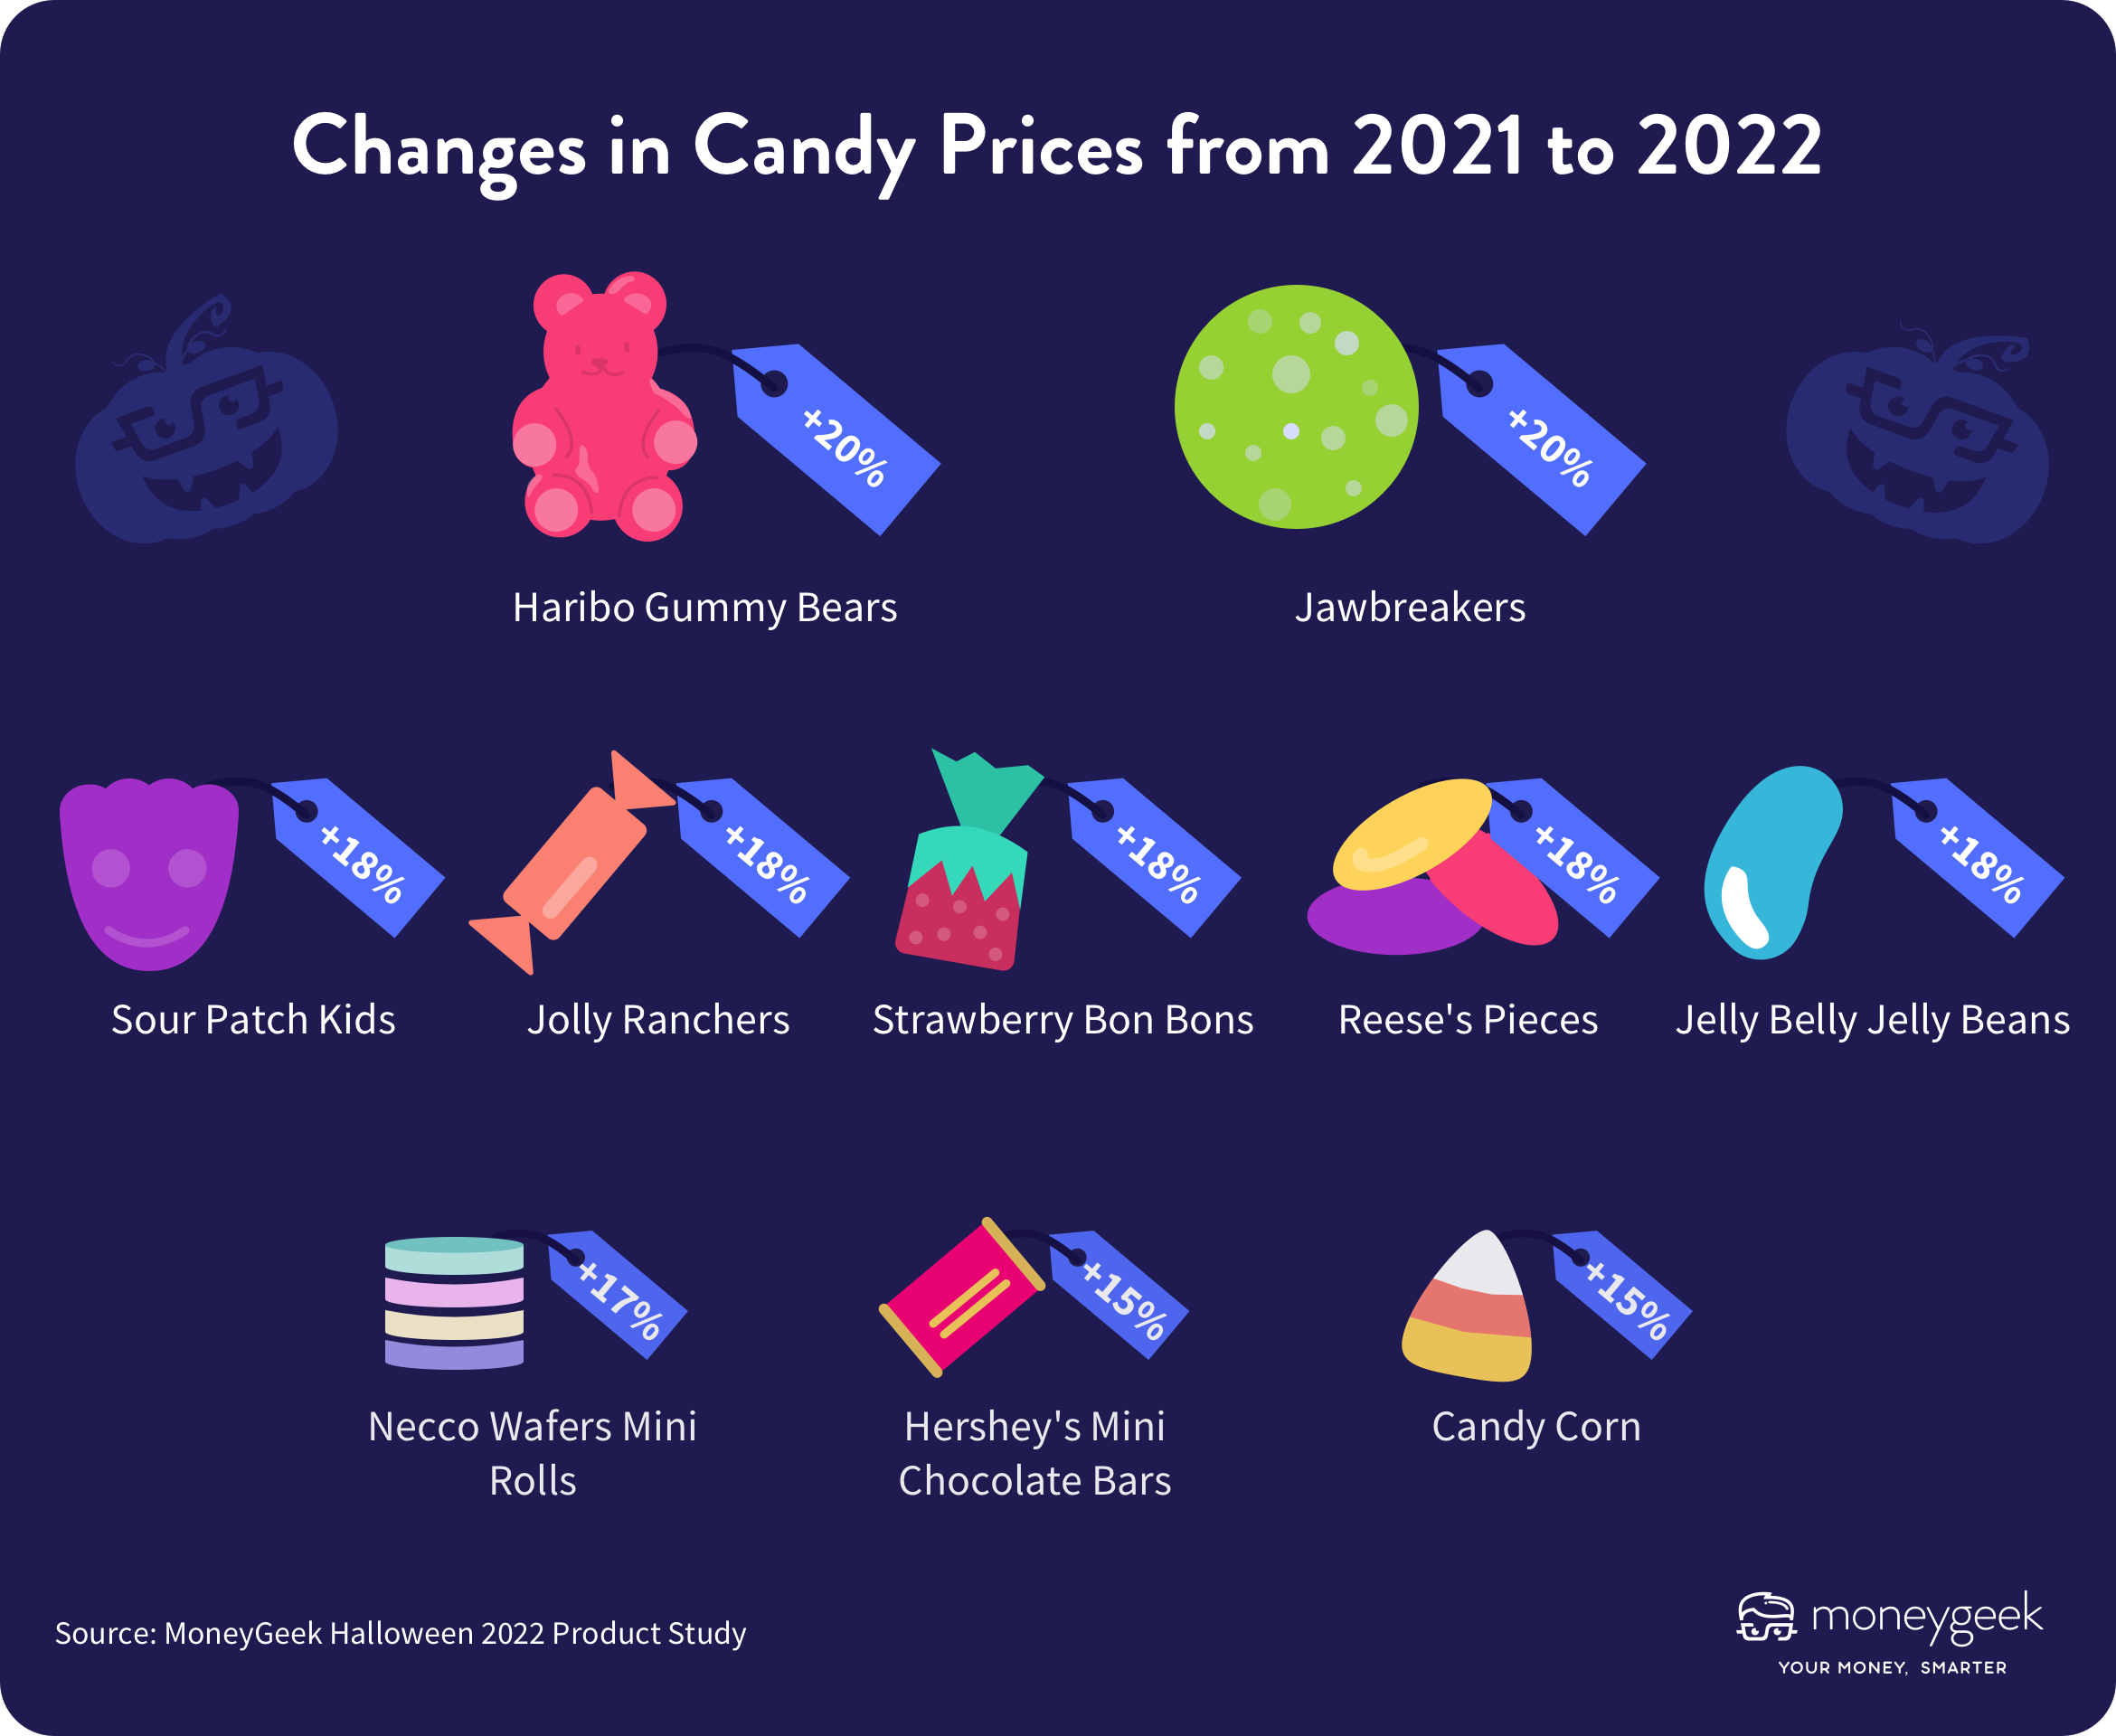 A graphic showing changes in price for some popular Halloween candies